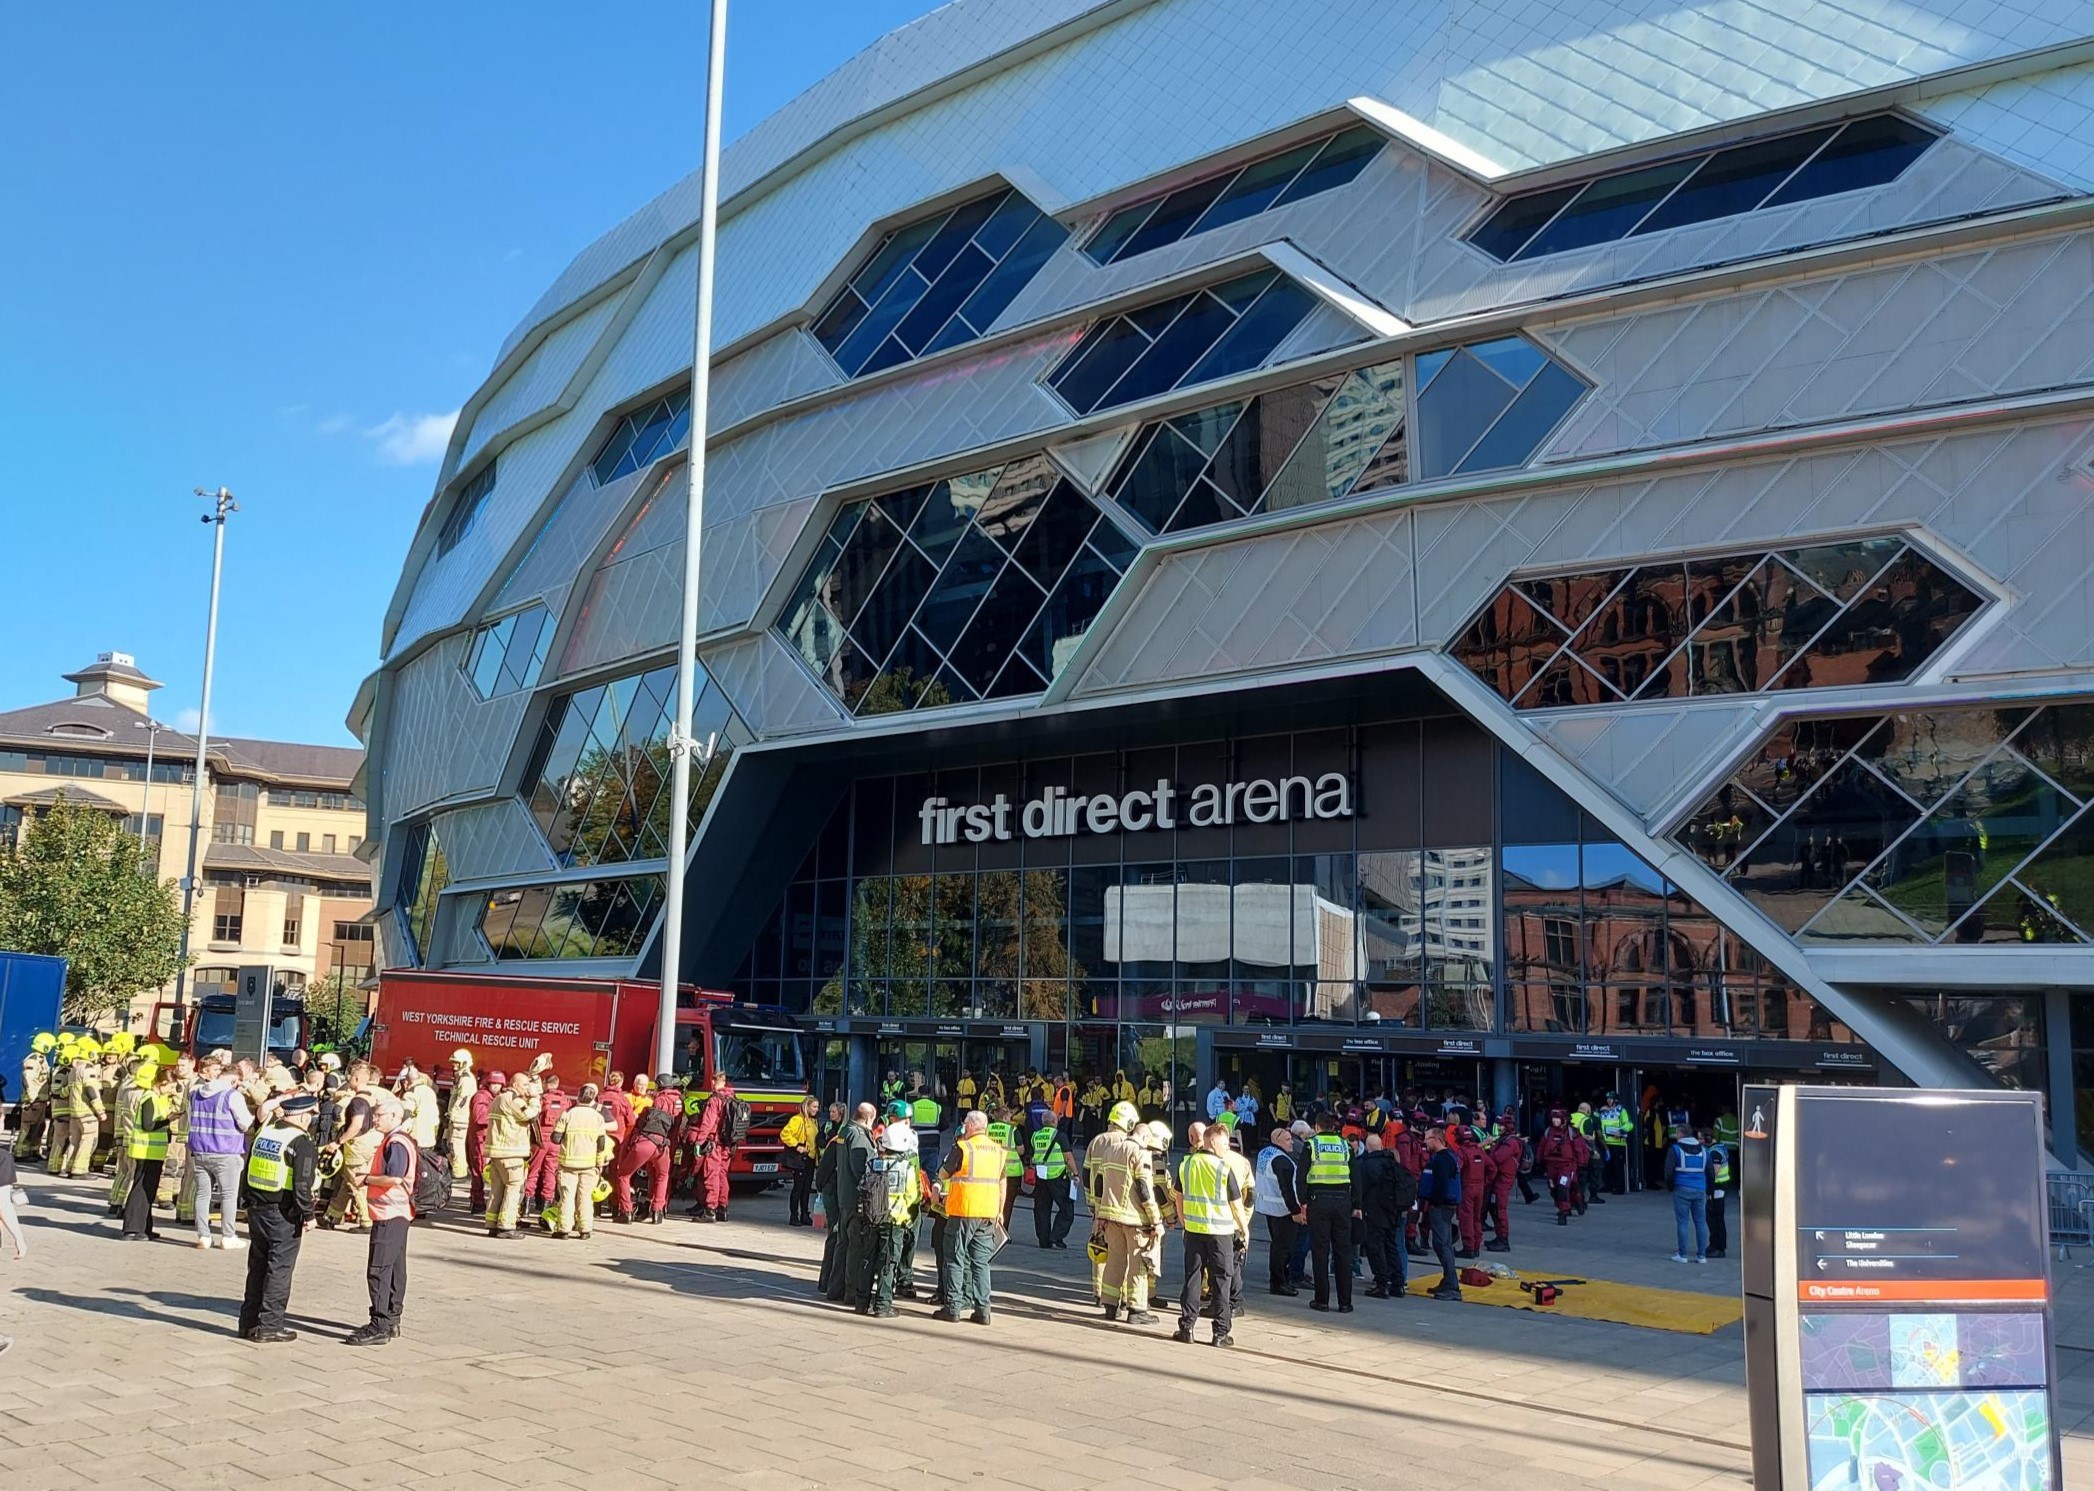 West Yorkshire emergency services take part in exercise at First Direct Arena Leeds